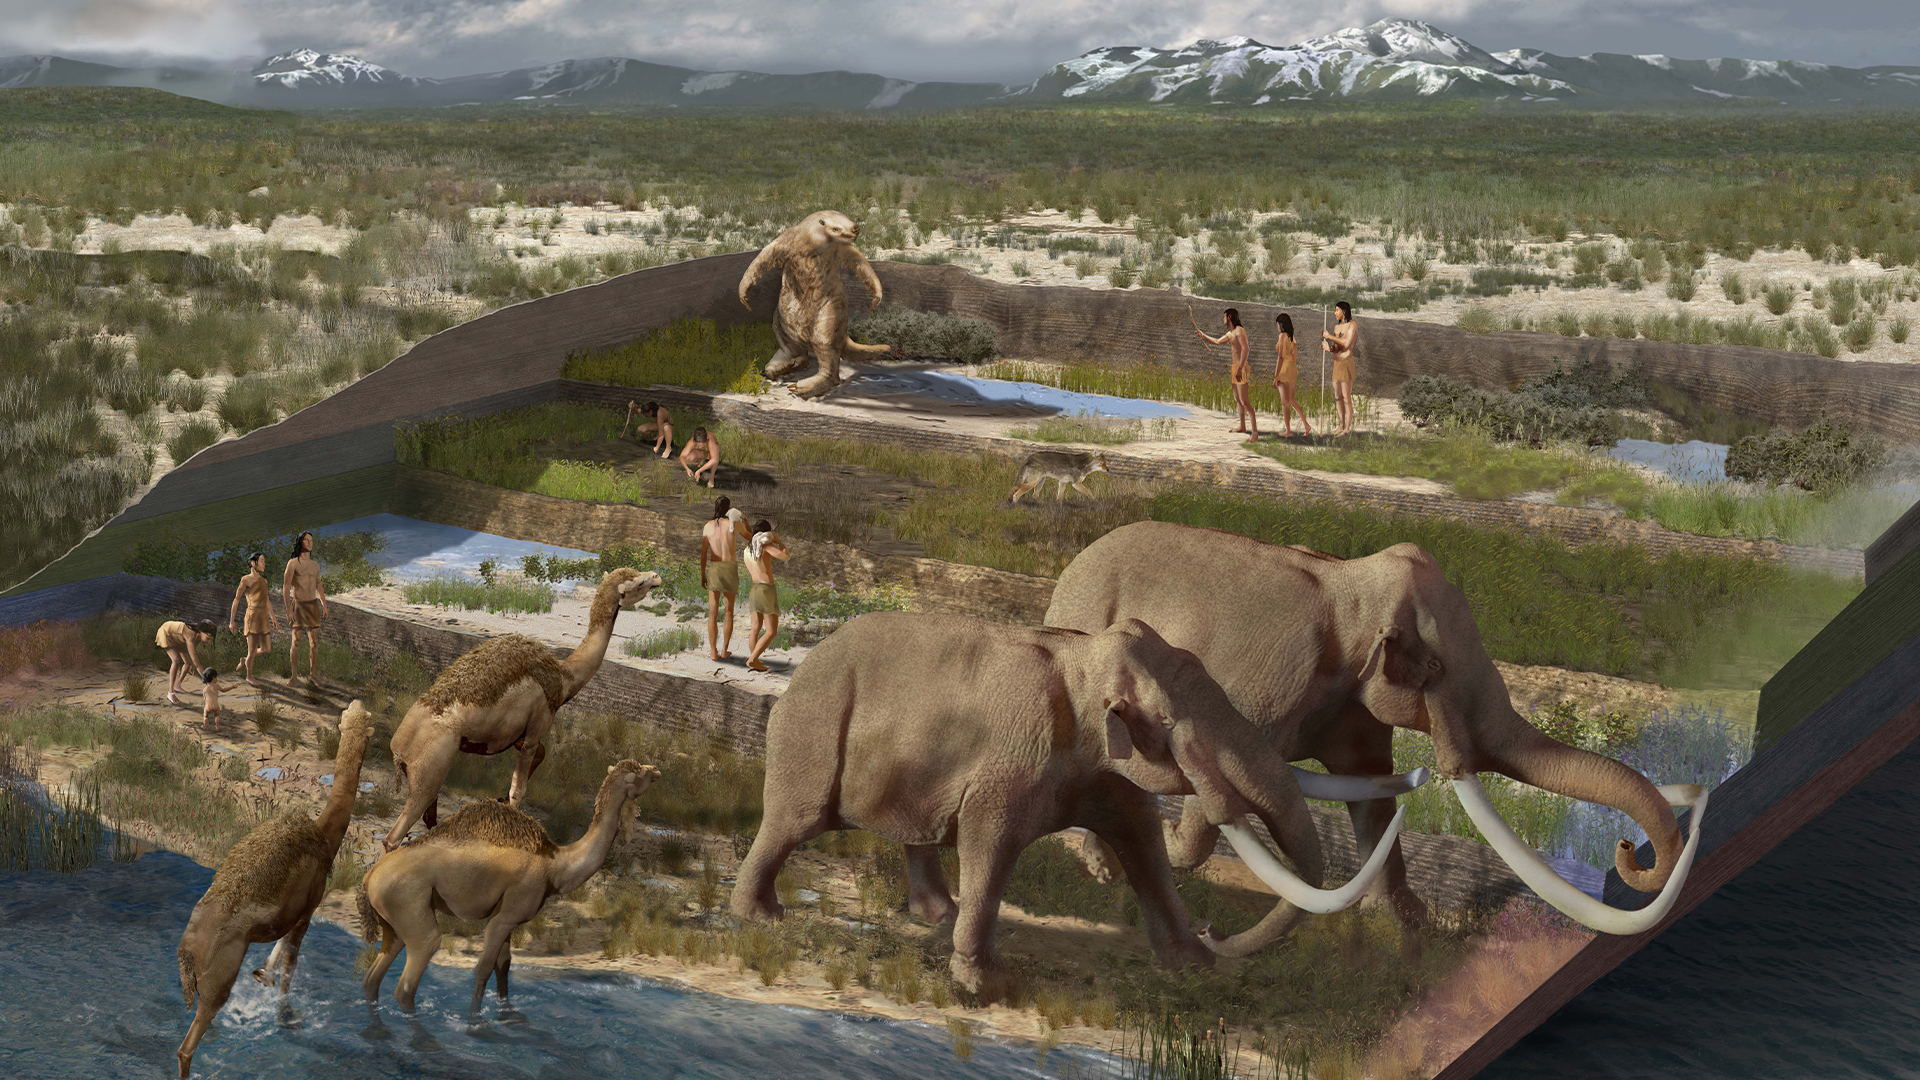 A painting of the Last Glacial Maximum with early human, low trees, green grass, blue springs and large elephants and other animals. Snow-capped mountains rest in the background.